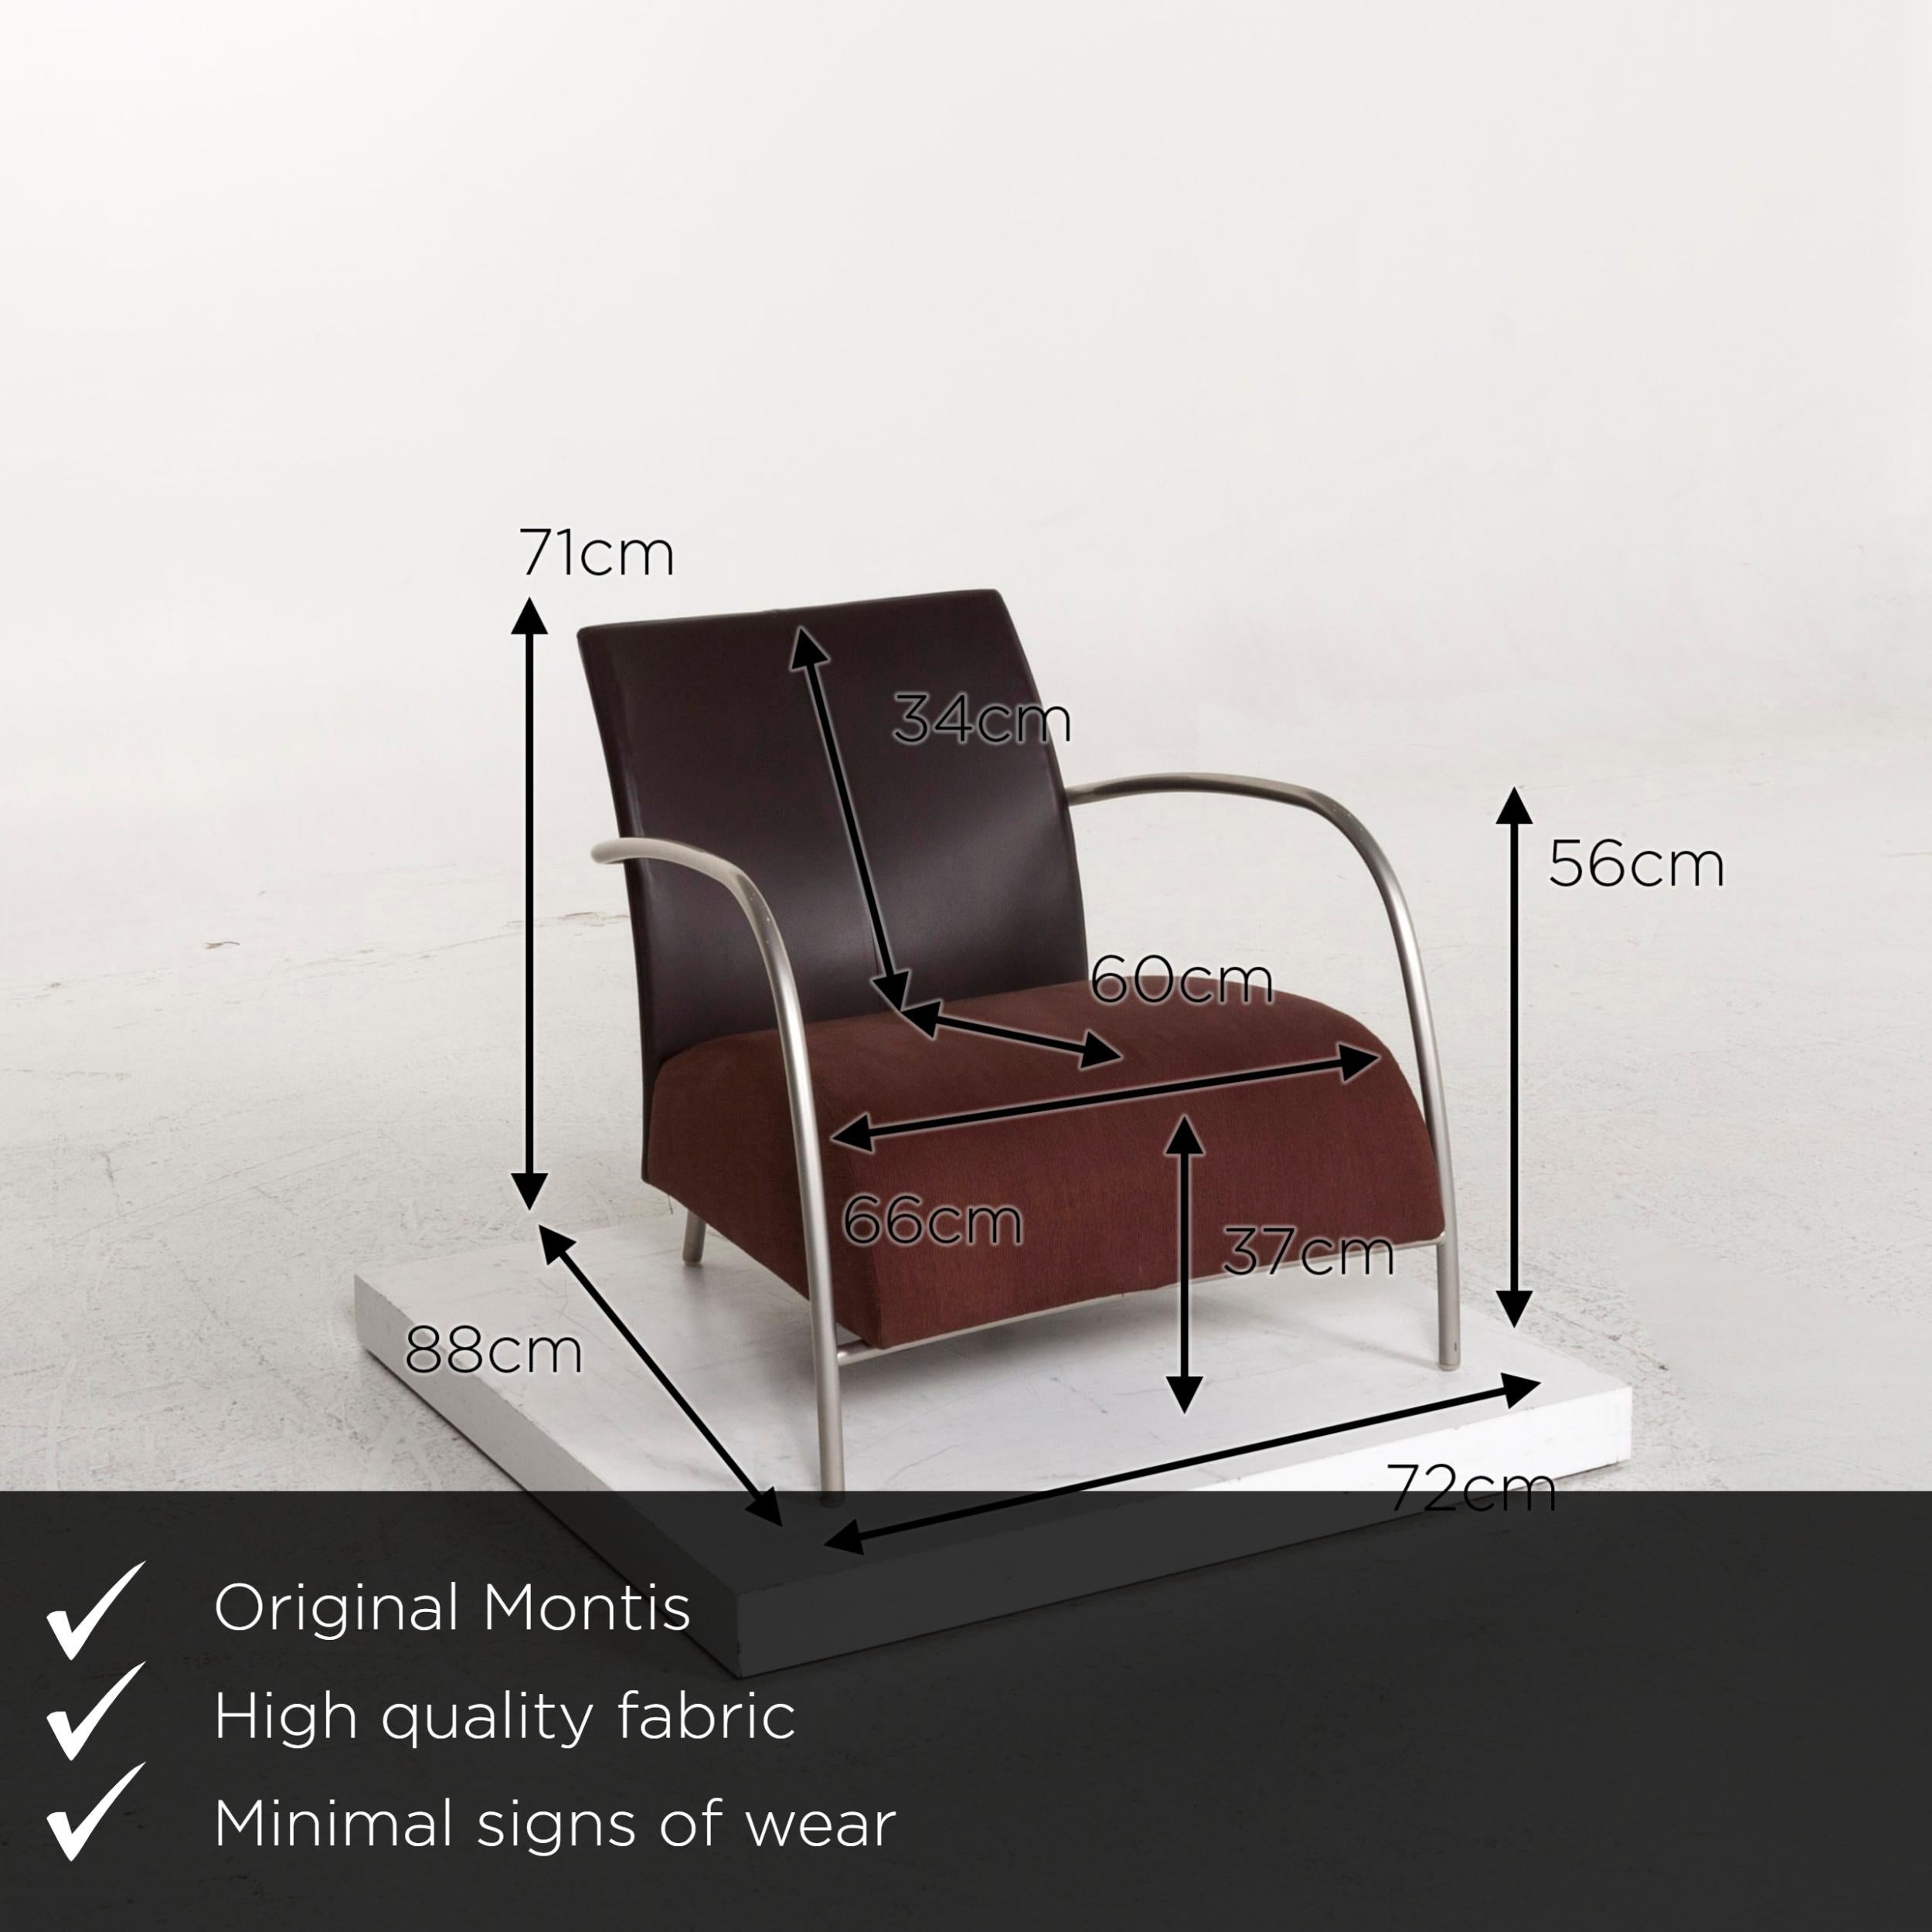 We present to you a Montis fabric leather armchair brown dark brown.

 

 Product measurements in centimeters:
 

Depth 88
Width 72
Height 71
Seat height 37
Rest height 56
Seat depth 60
Seat width 66
Back height 34.
  